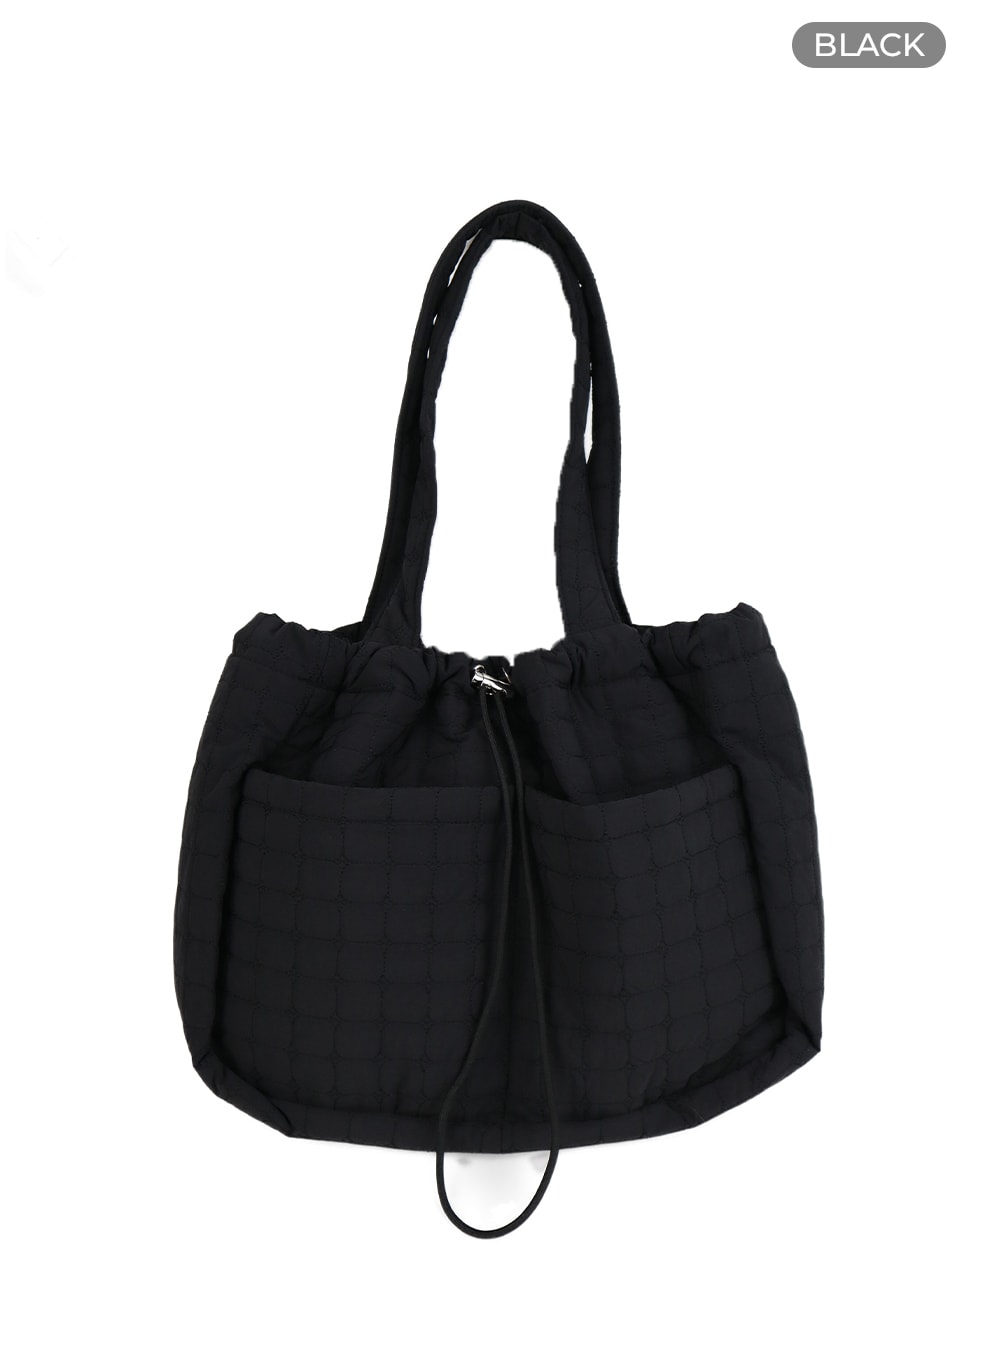 quilted-string-tote-bag-if423 / Black